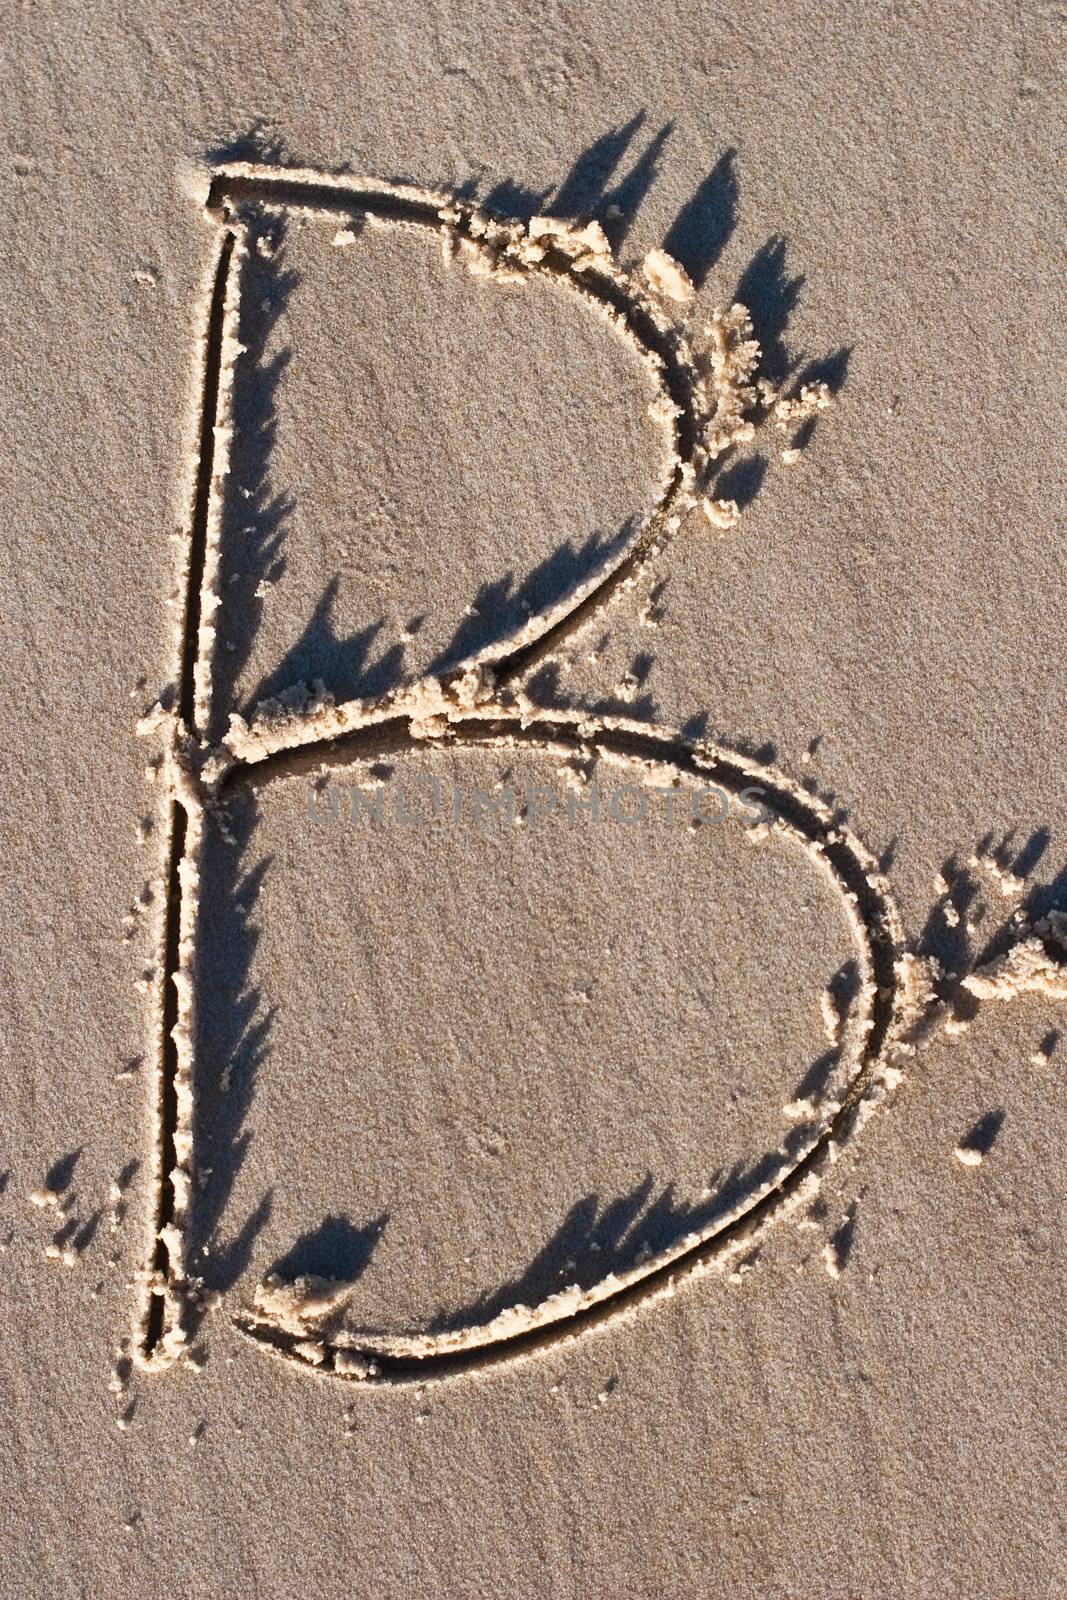 Letter B drawn in the sand. 